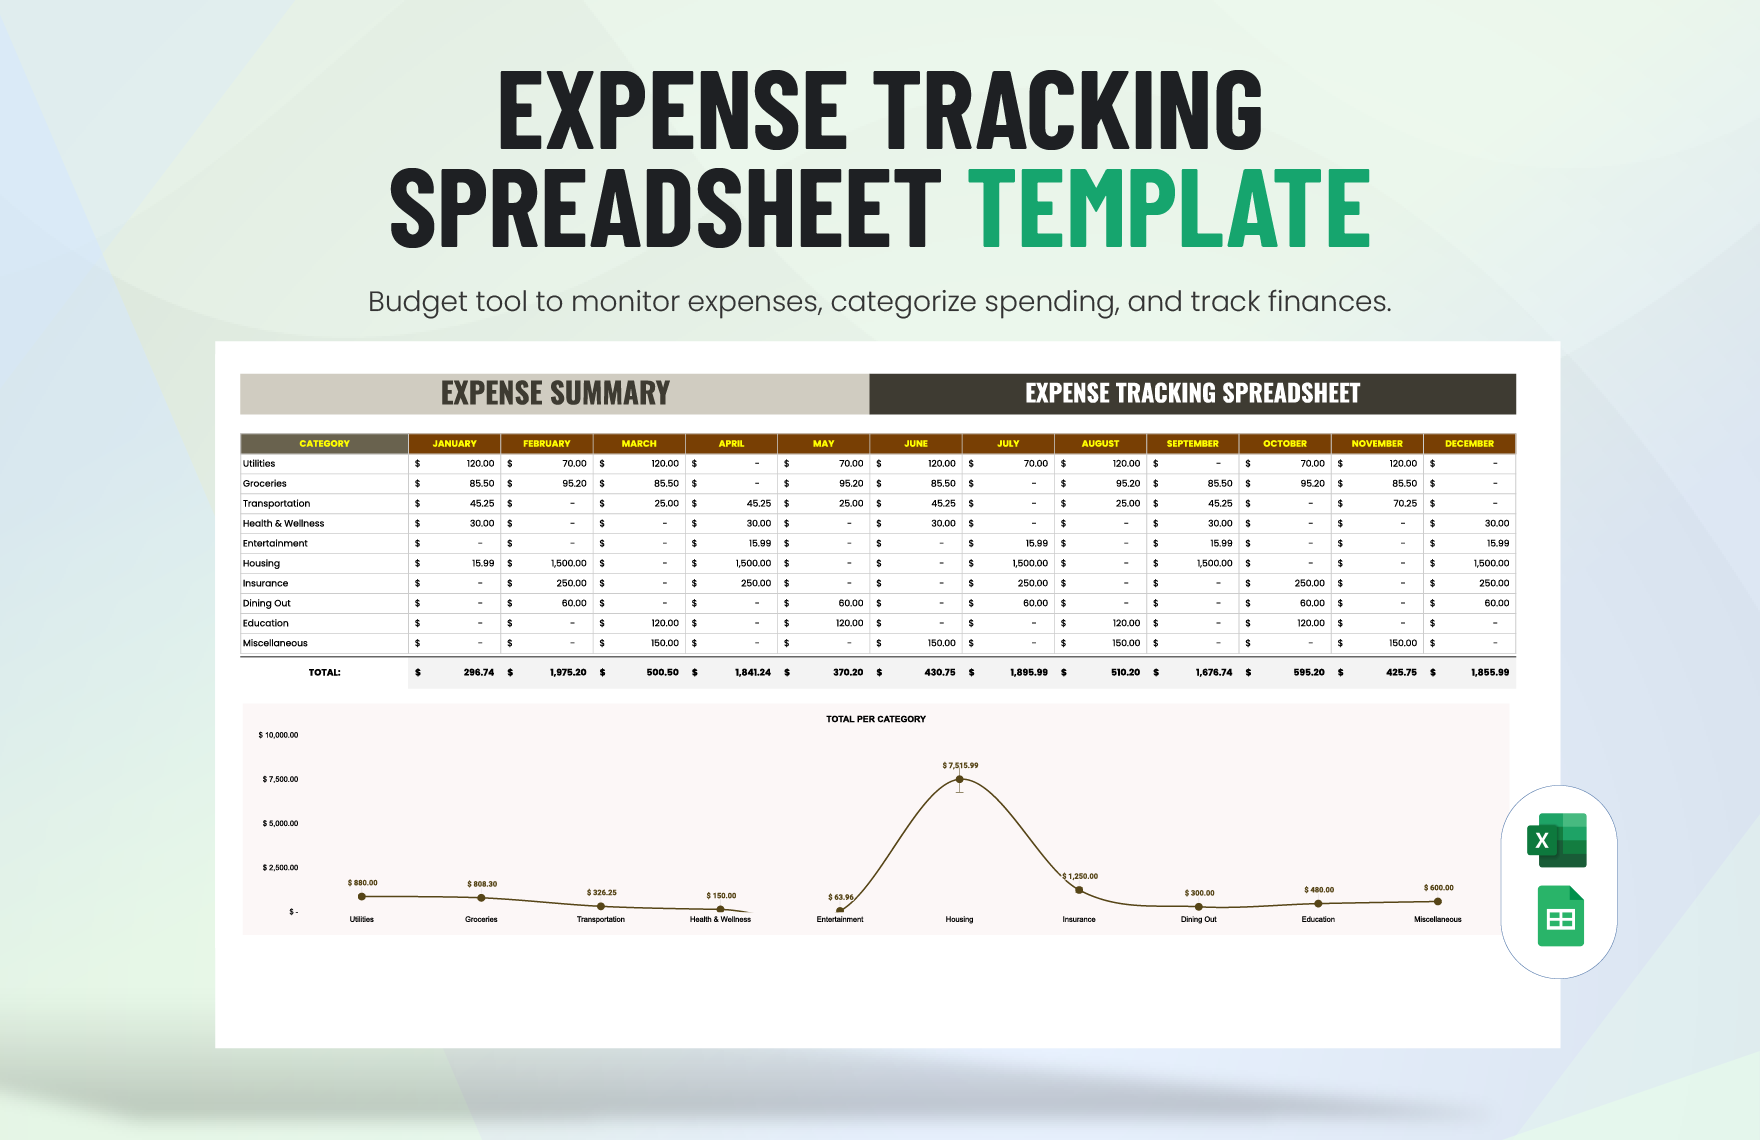 Expense Tracking Spreadsheet Template in Excel, Google Sheets